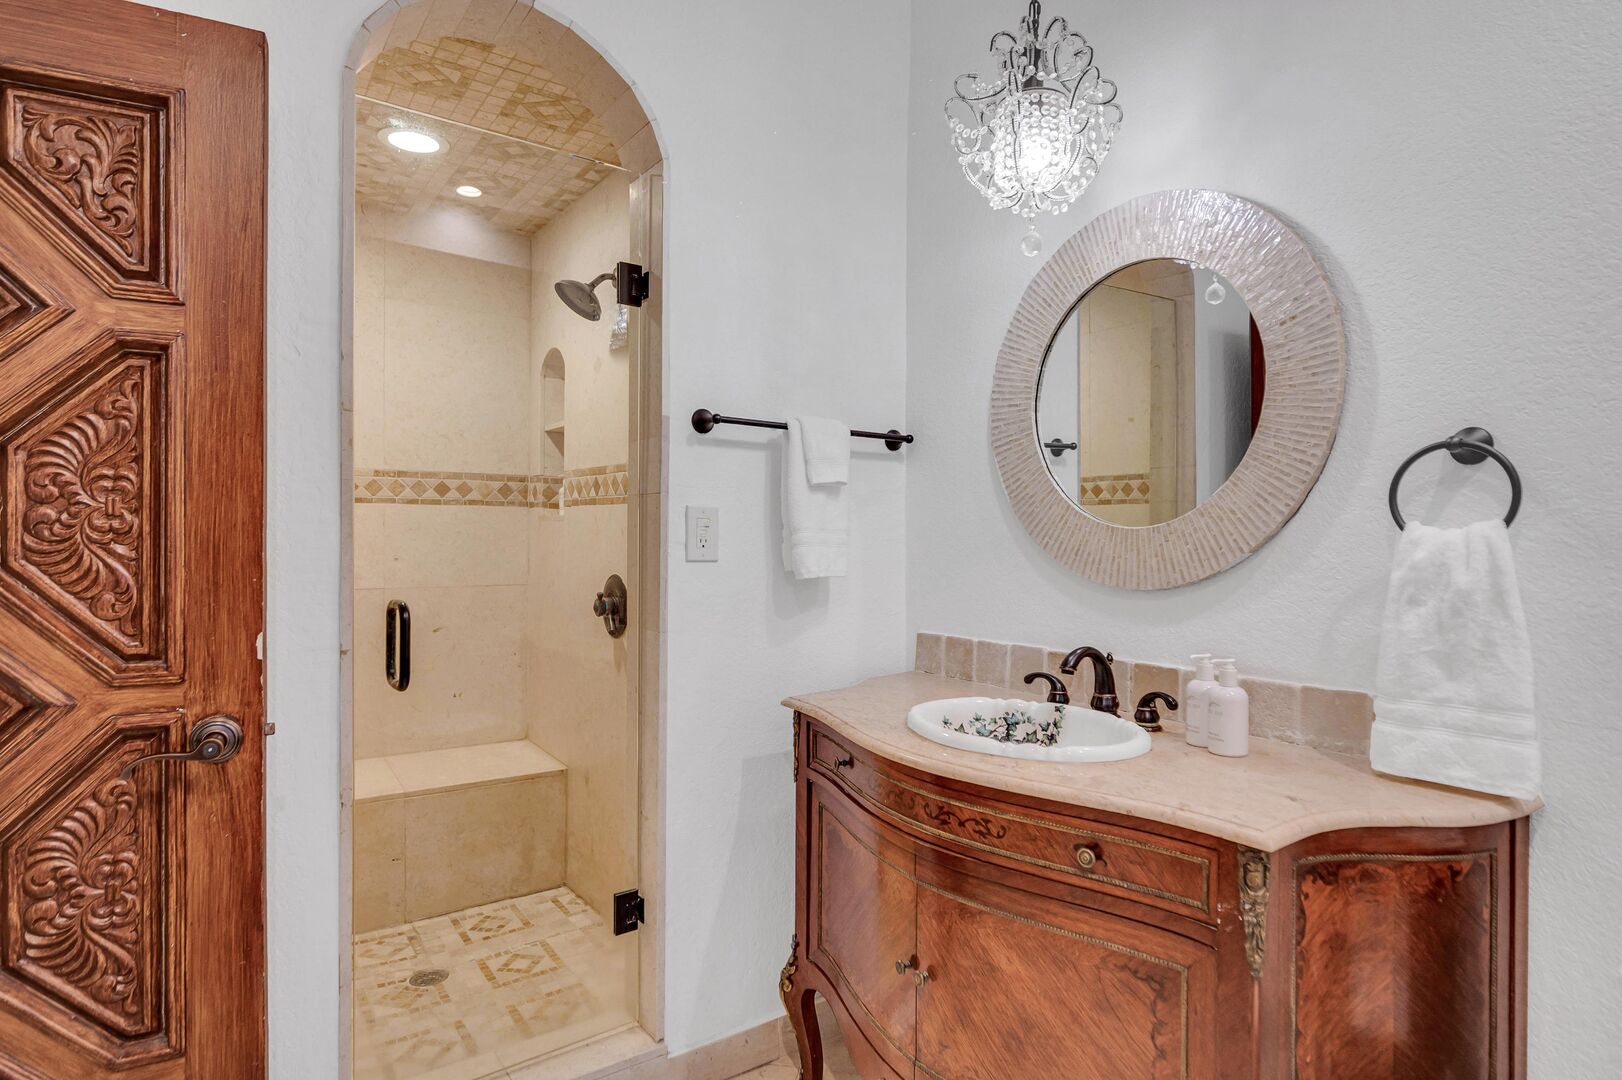 The primary bathroom features a walk-in shower.